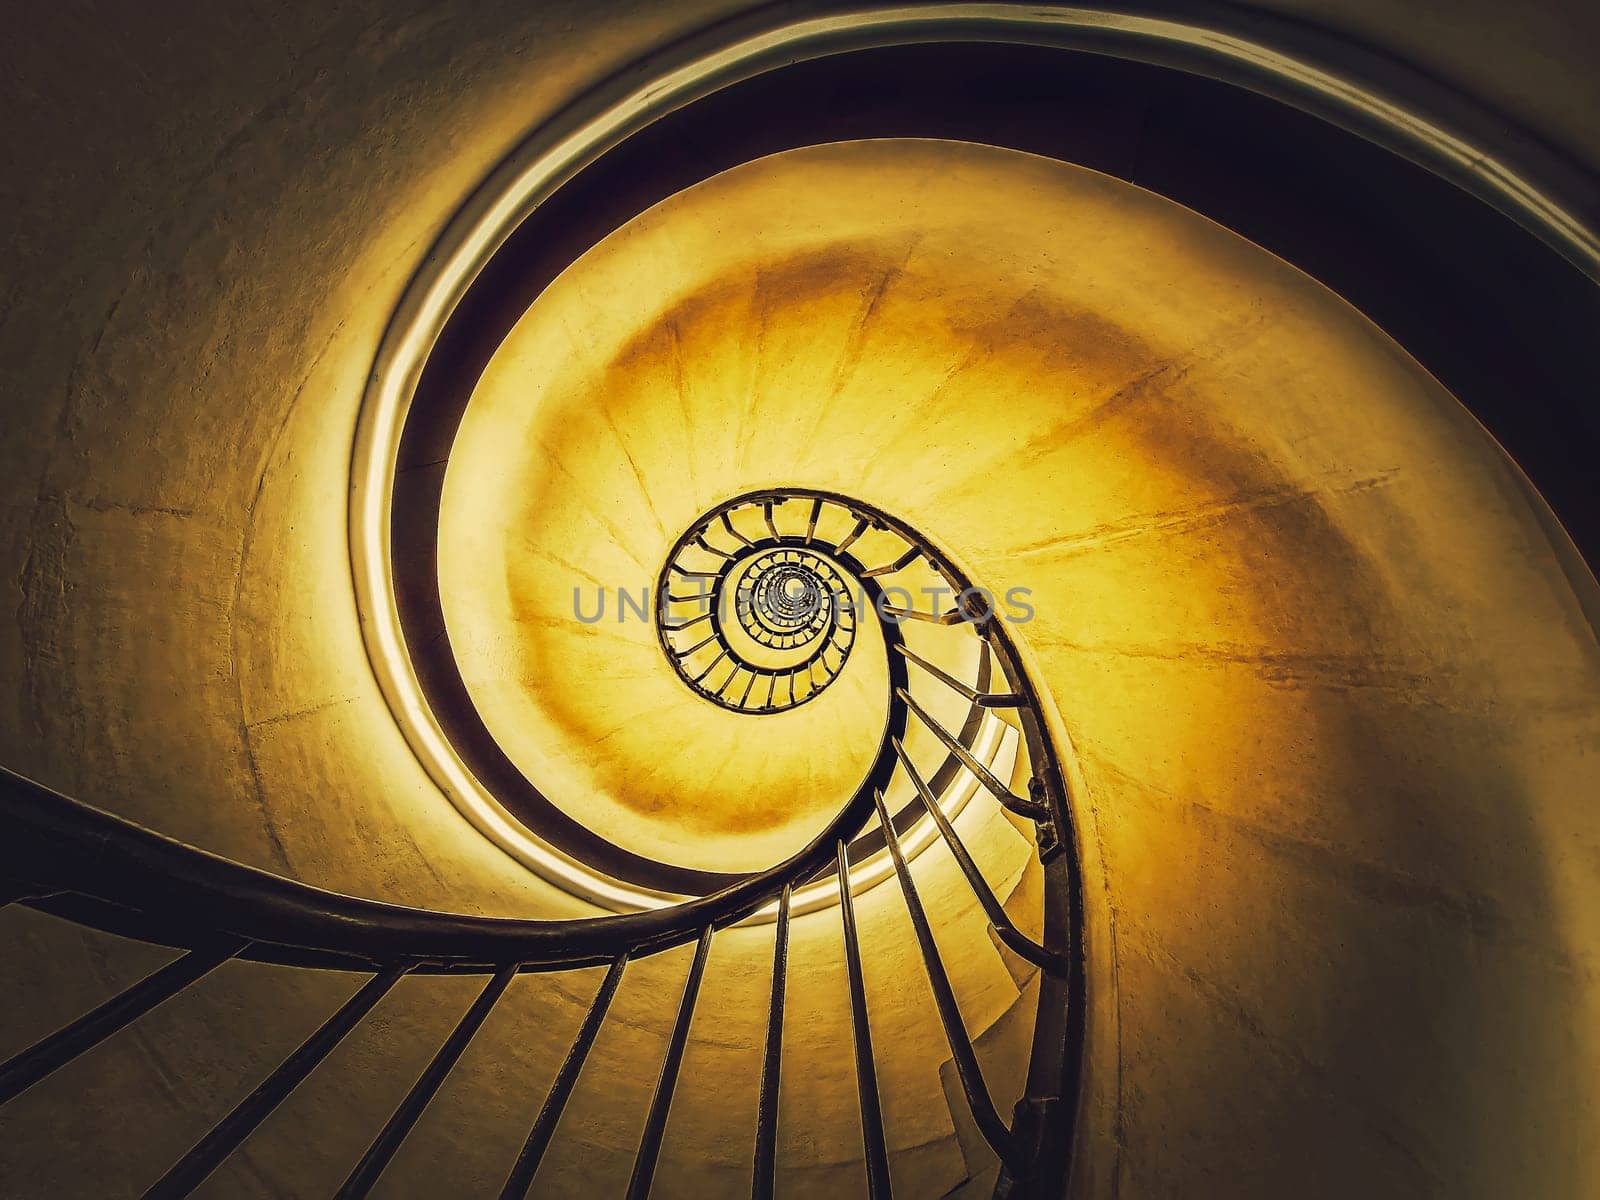 Spiral stairway abstract swirl hypnotising perspective. View downstairs to infinity circular stairs glowing in yellow light background by psychoshadow